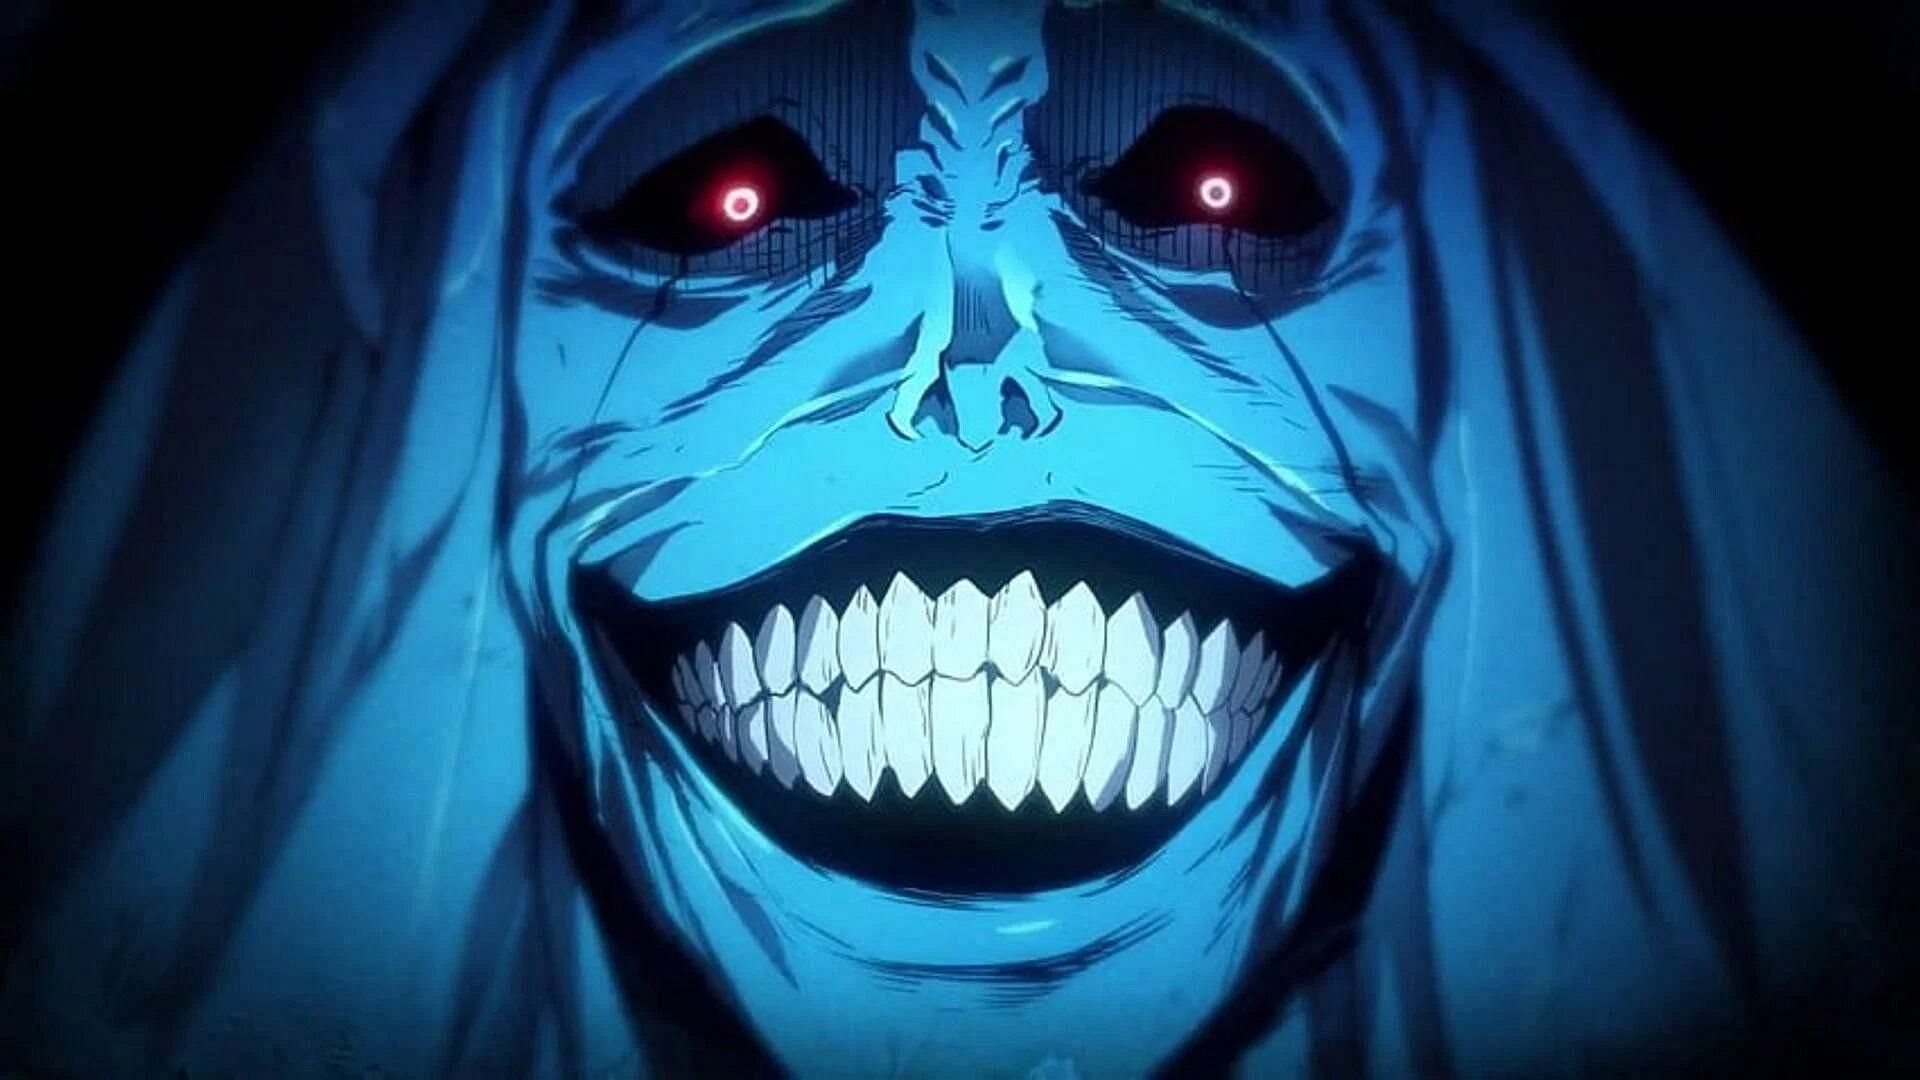 The iconic God Statue smile in the anime (Image via A-1 Pictures).